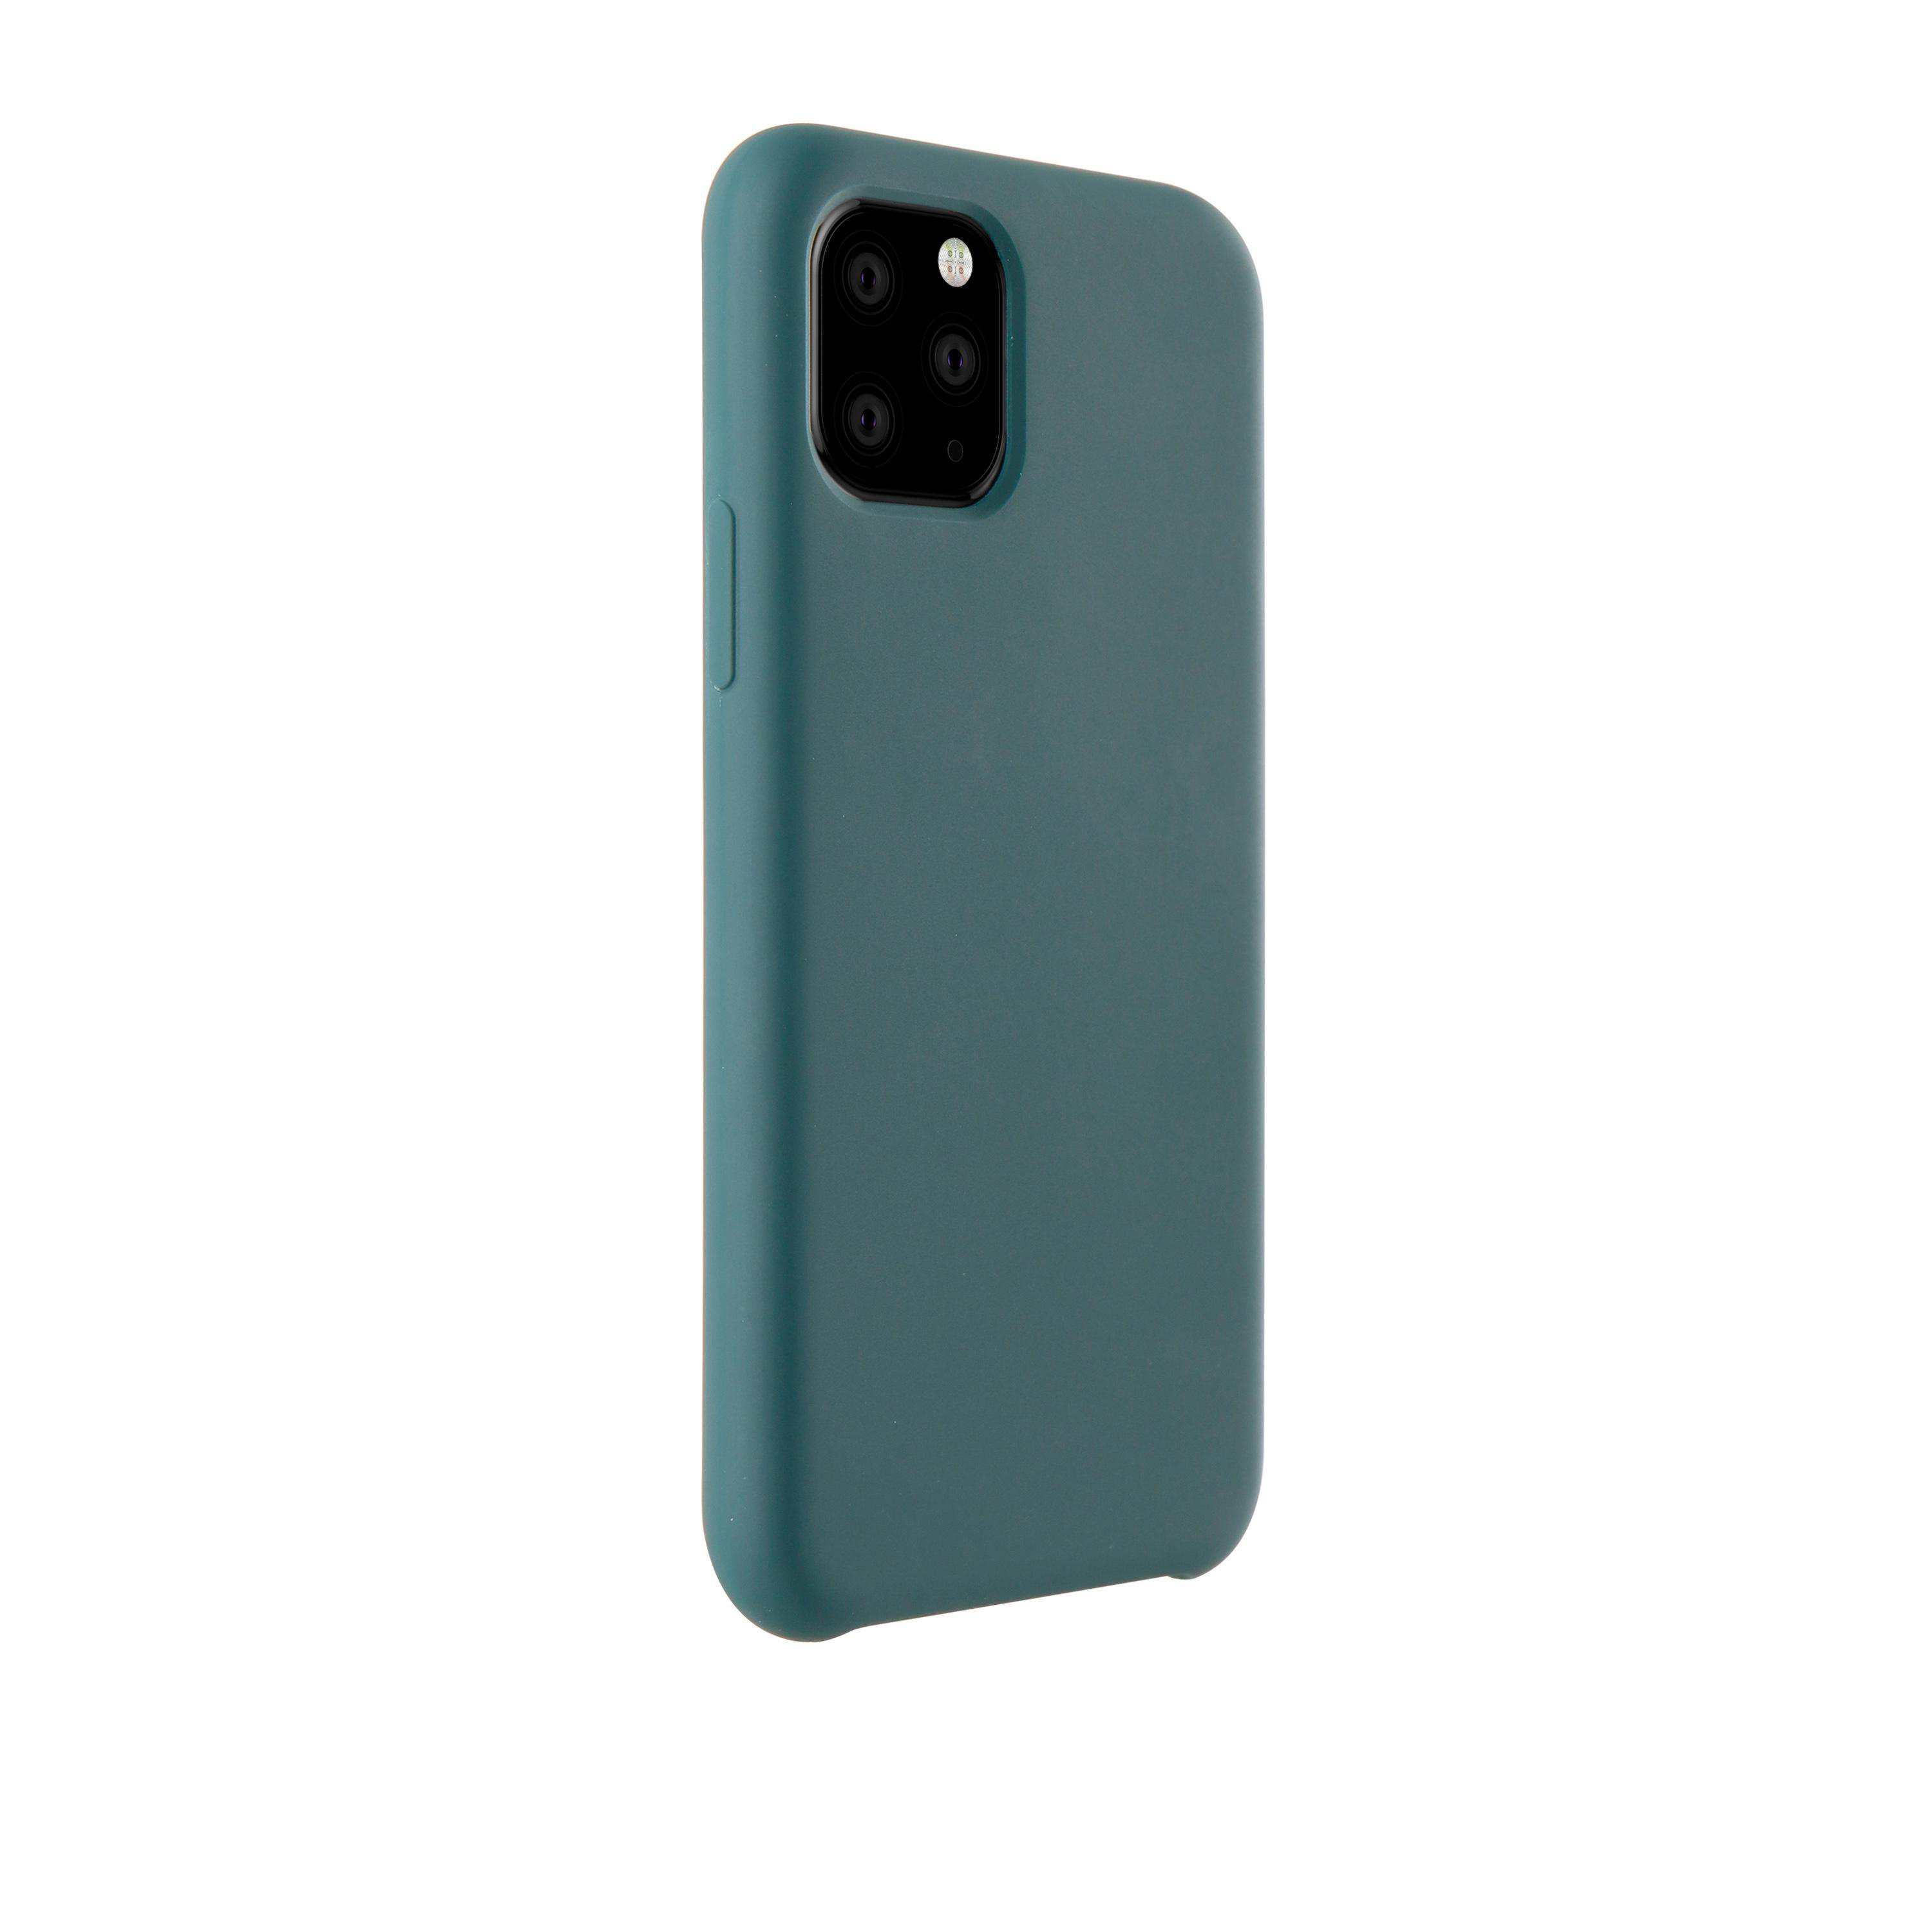 iPhone Midnight Apple, Hype green Cover, Backcover, VIVANCO Pro, 11